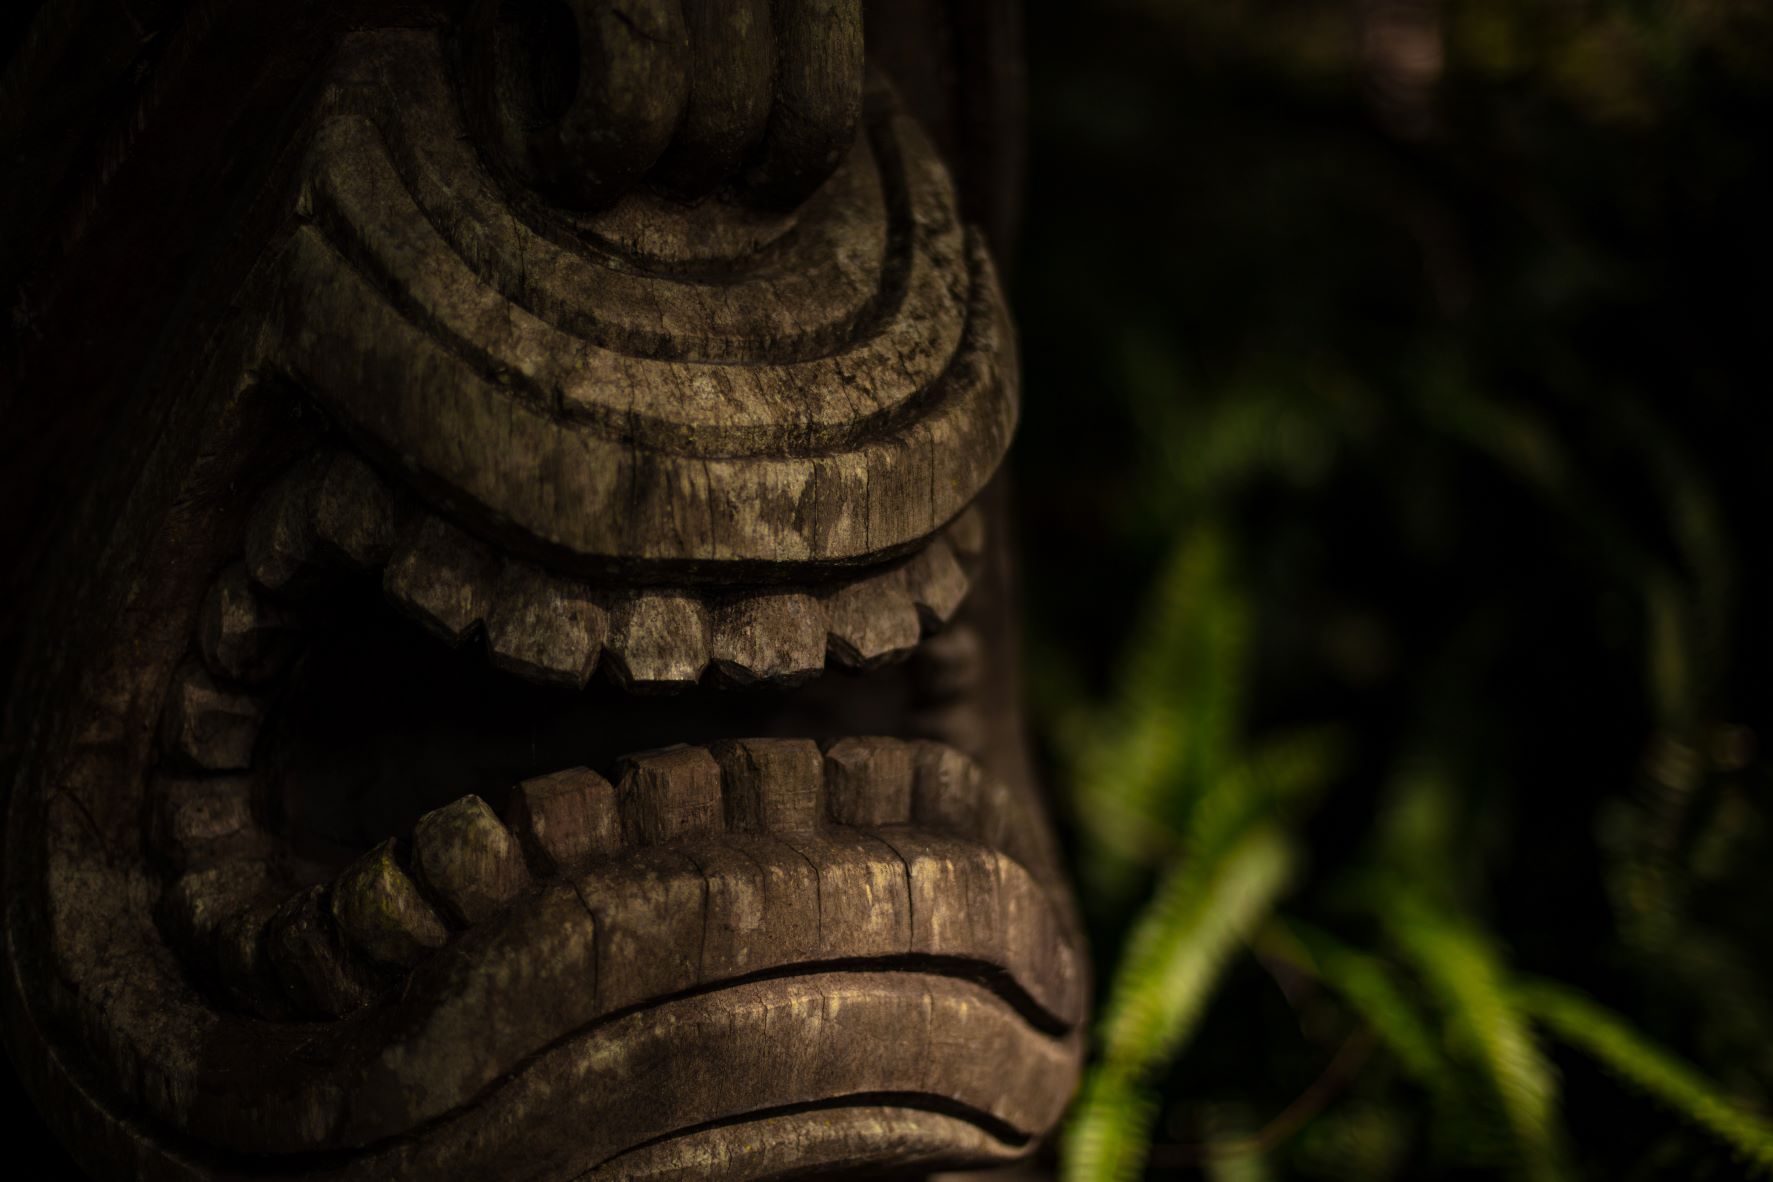 Wooden totem in the forest - Photo by Patrick Hendry on Unsplash